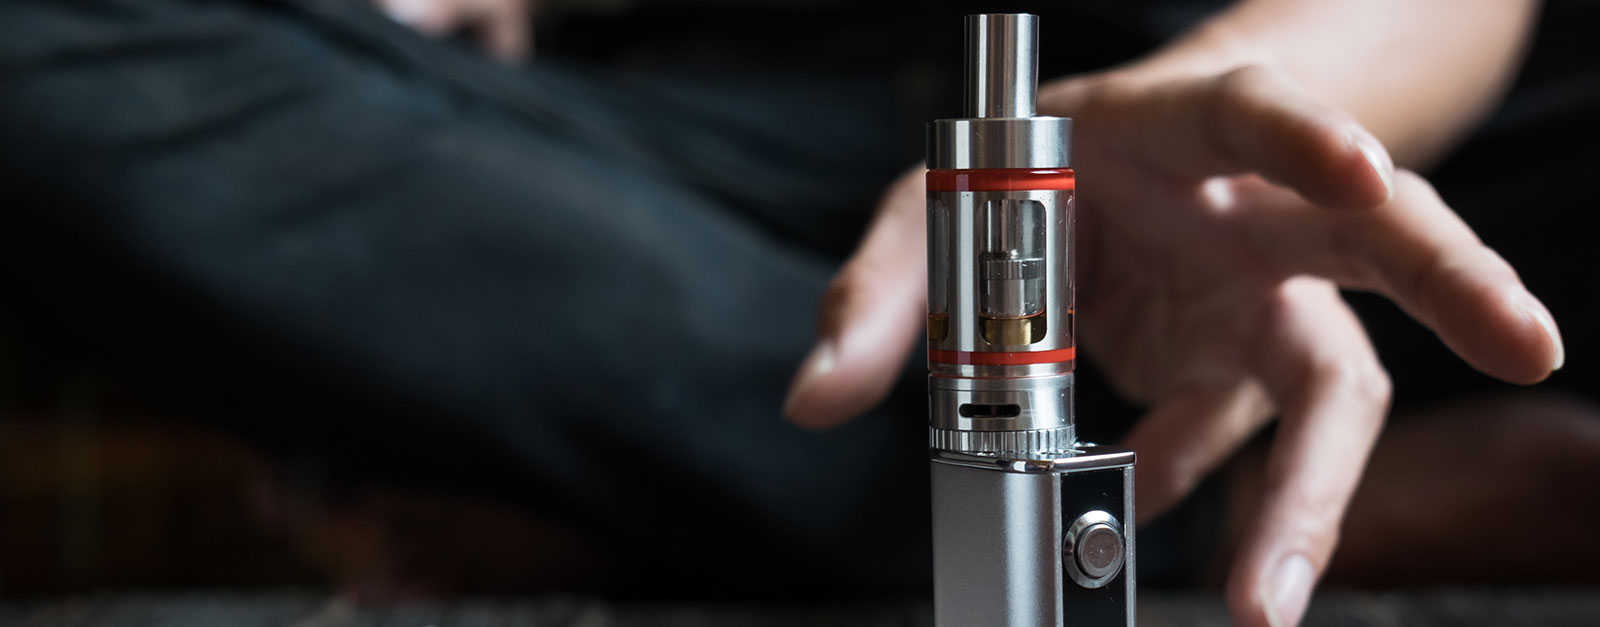 Five misconceptions about vaping